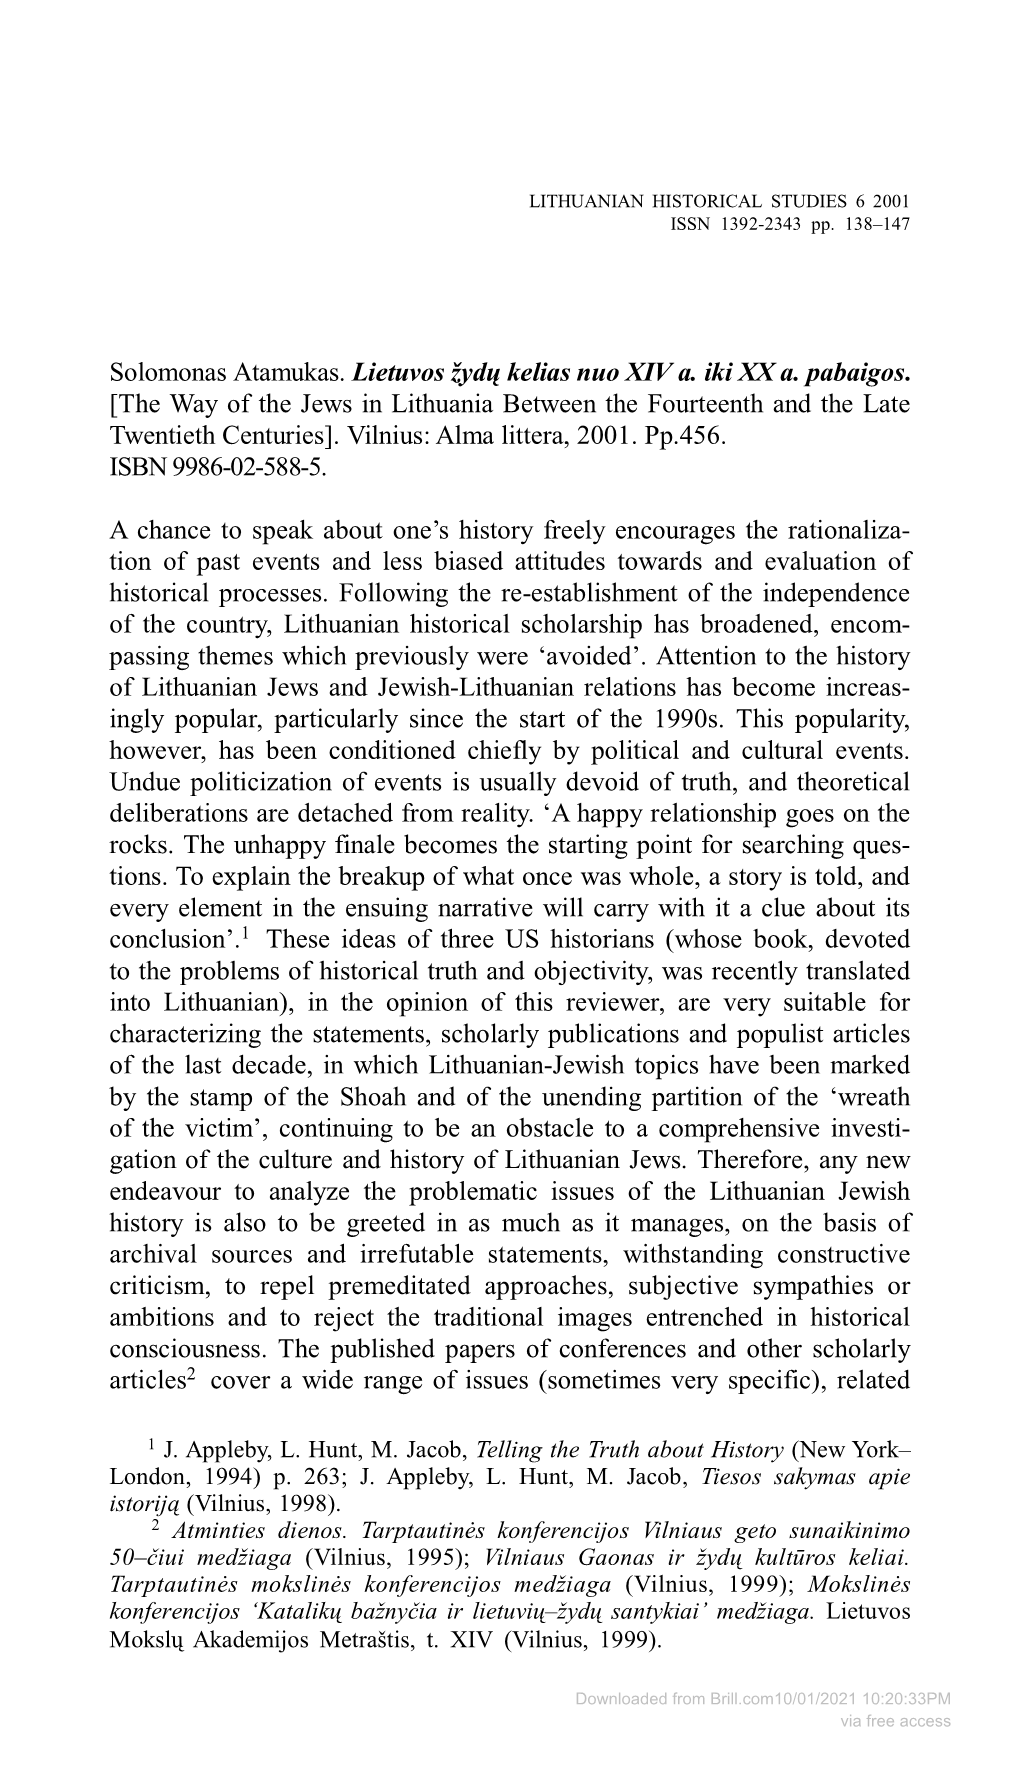 The Way of the Jews in Lithuania Between the Fourteenth and the Late Twentieth Centuries]